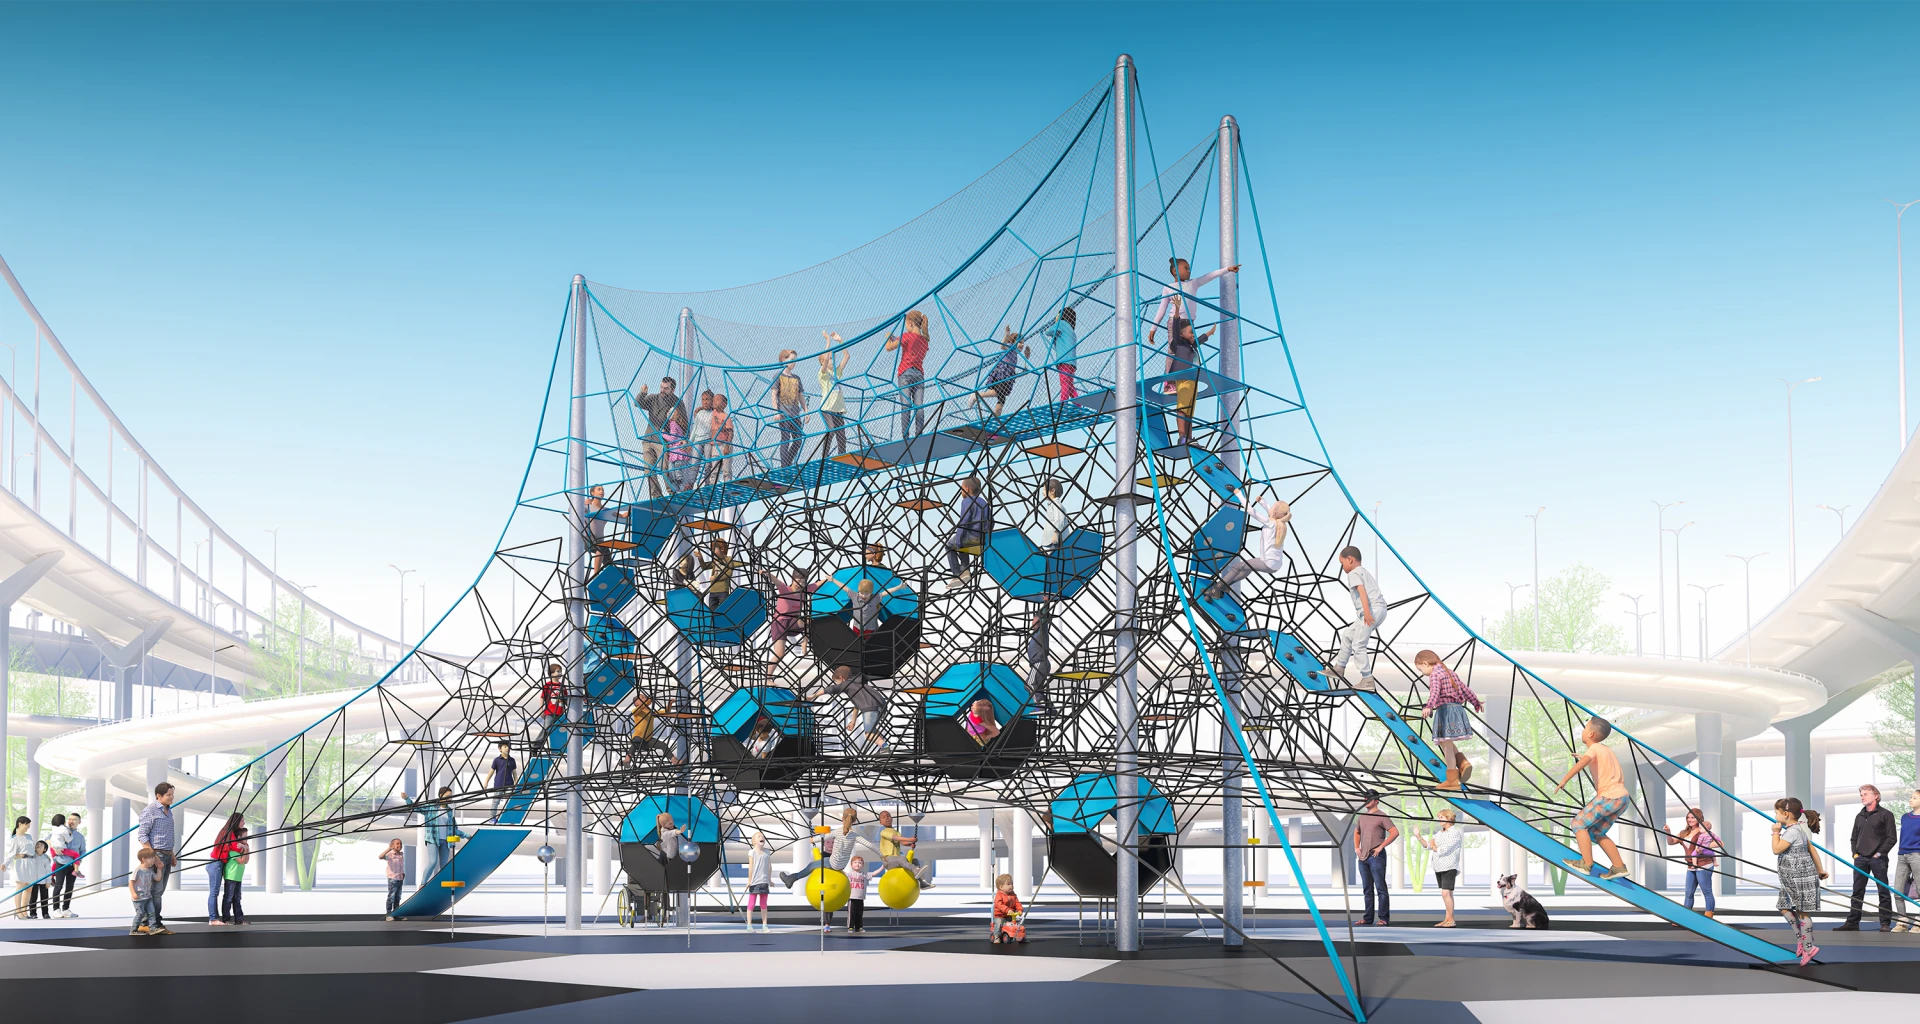 Children playing on a large rope playground structure